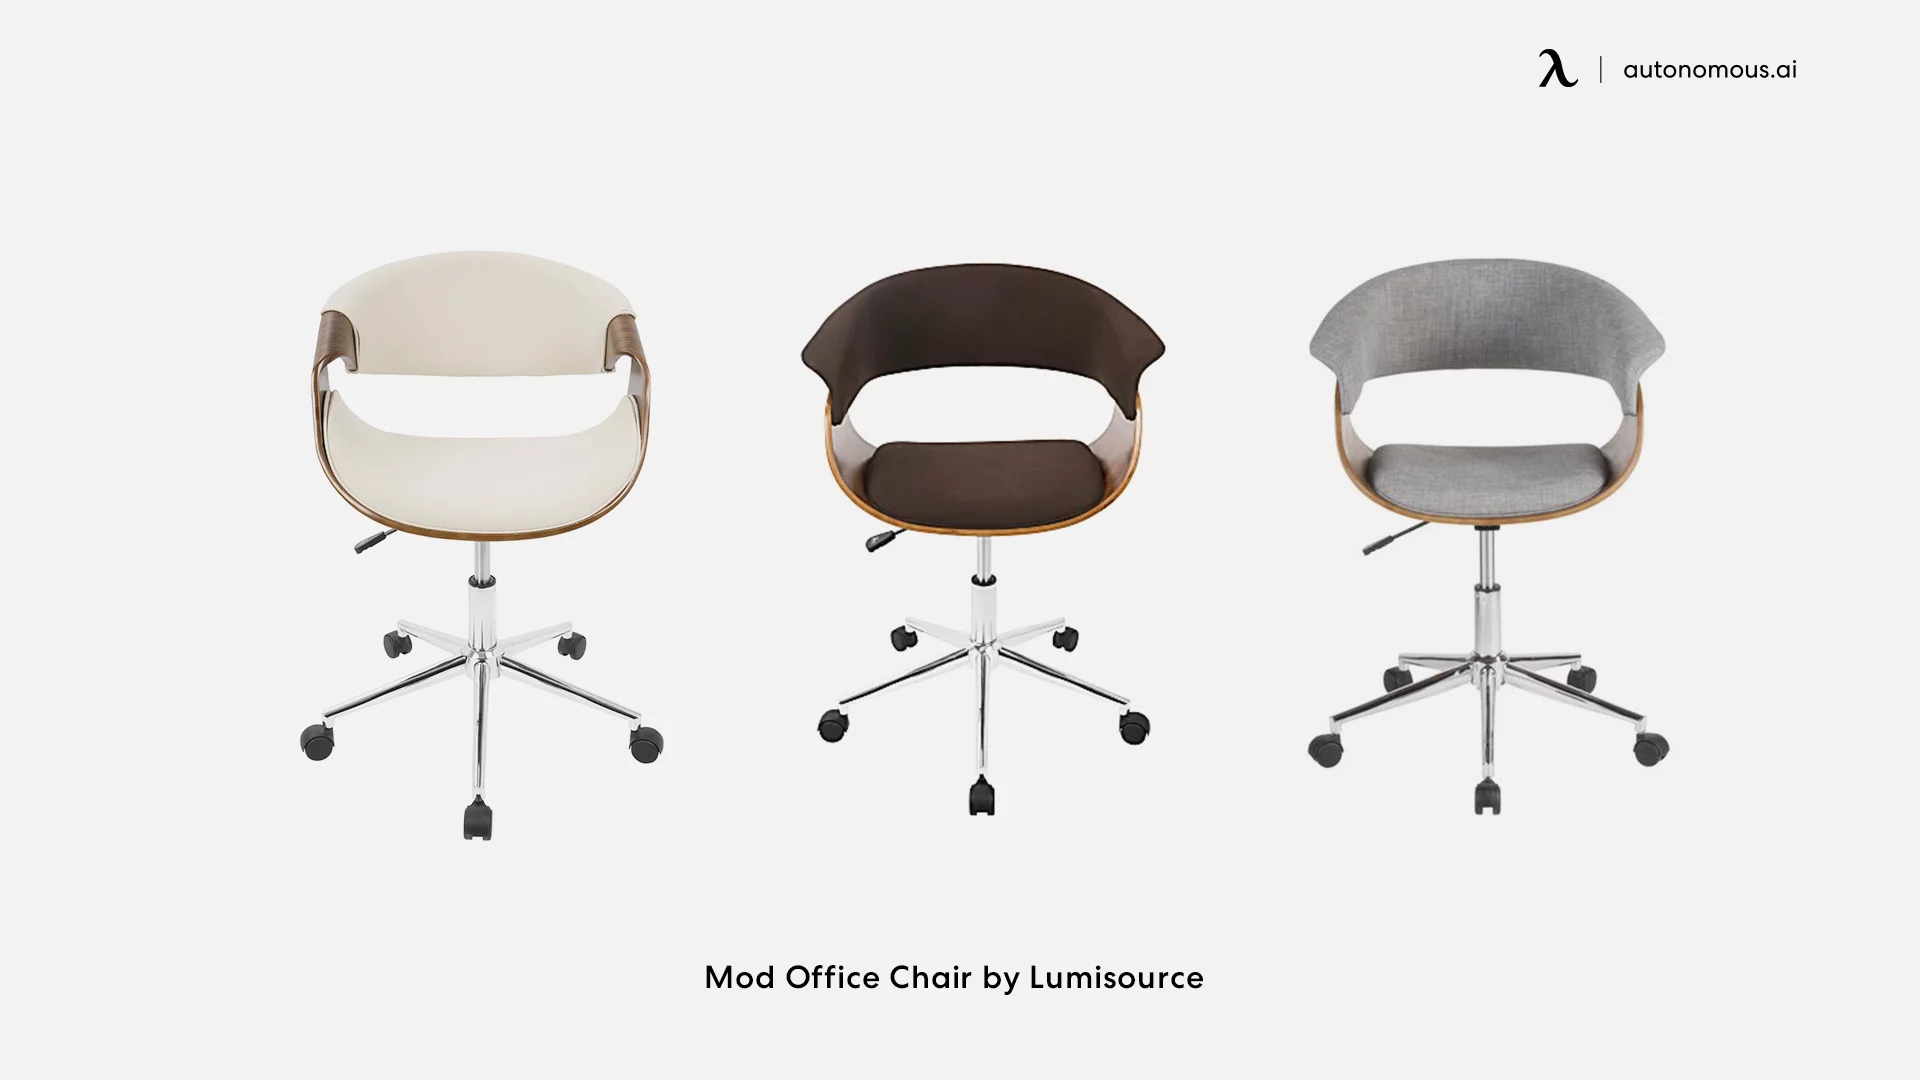 Mod Office Chair by Lumisource